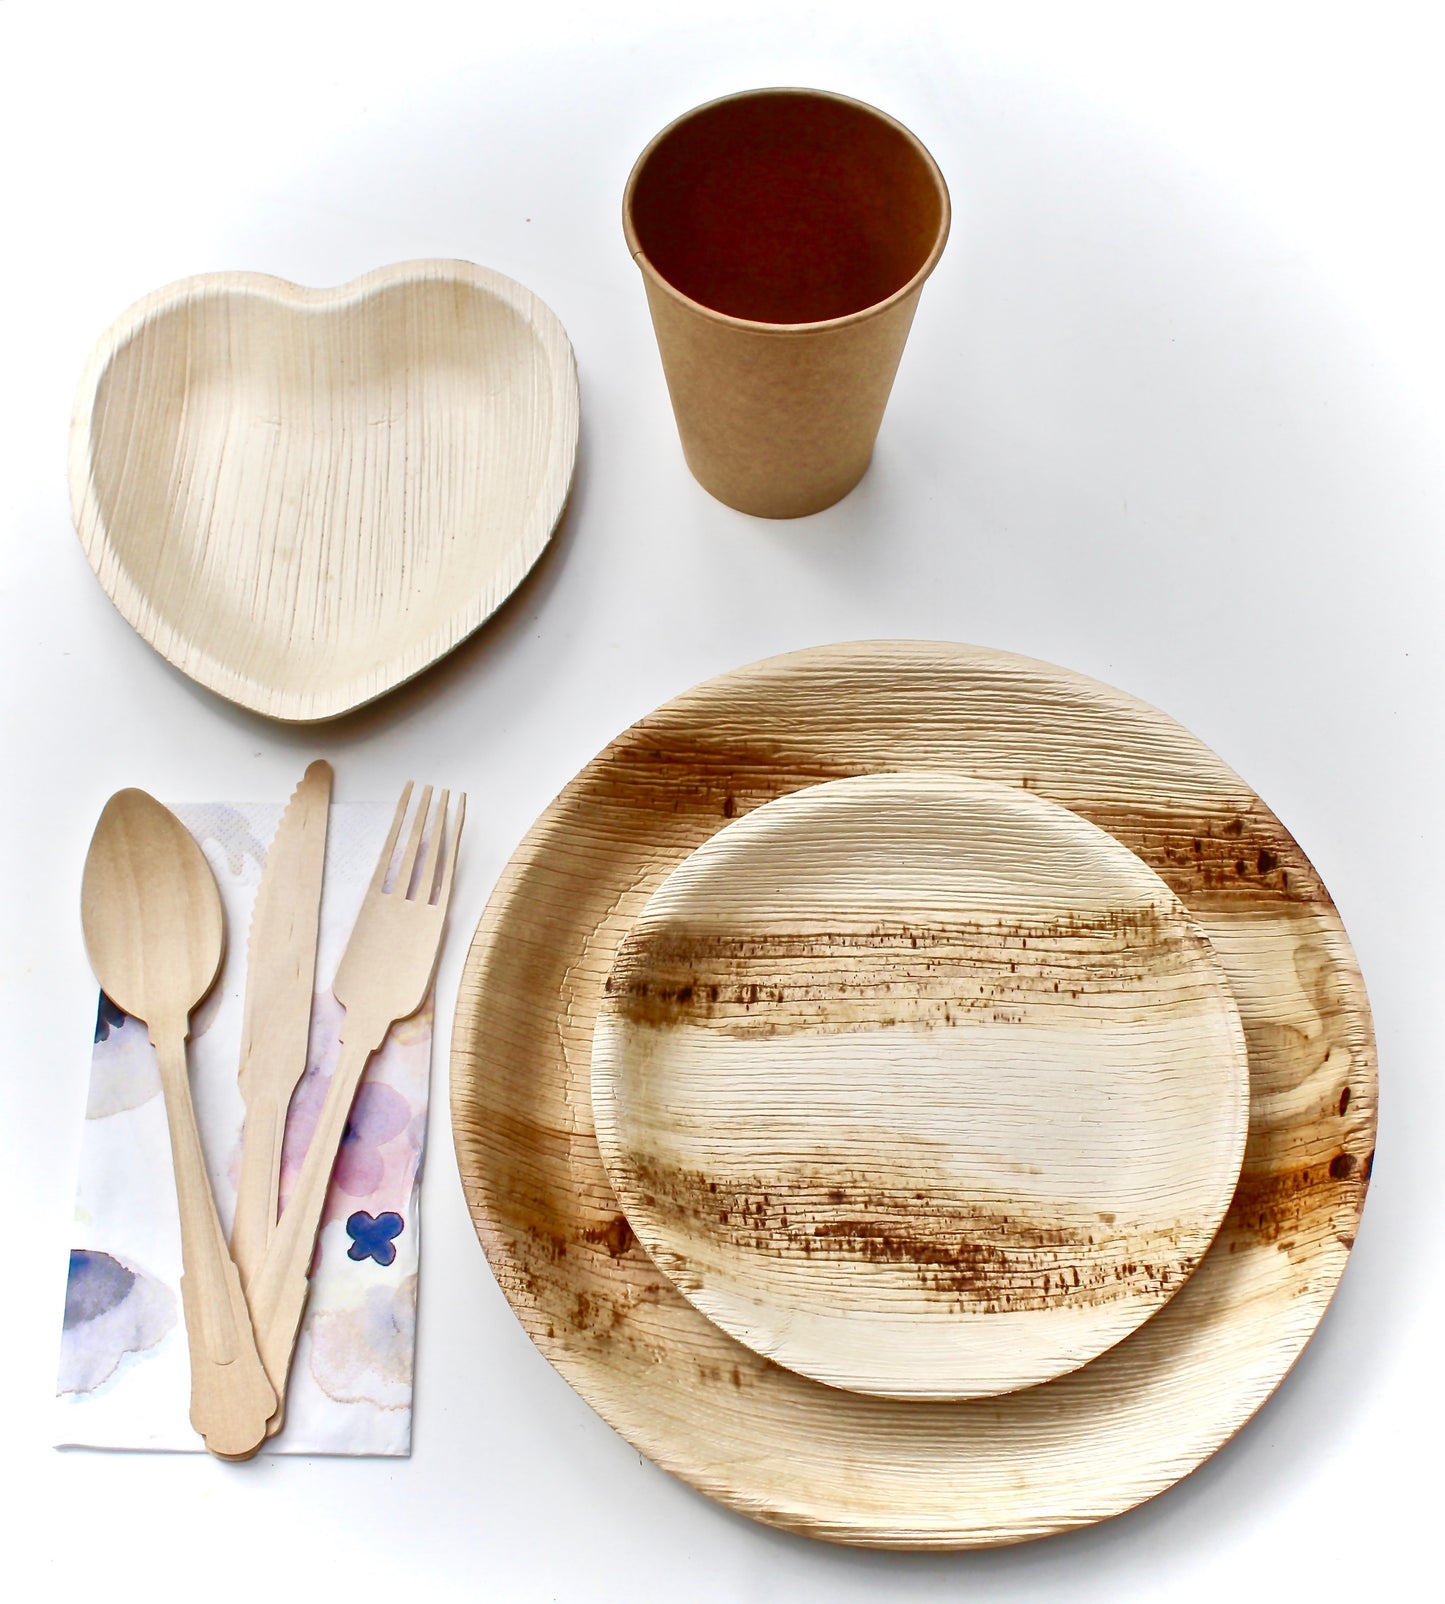 Palm Leaf Plate 20 Pic Round 10" - 20 pic Sea Grape 7" - 20 Pic Heart 6" - 20 Pic Cup - 20 Pic Napkin - 60 Pic Utensils